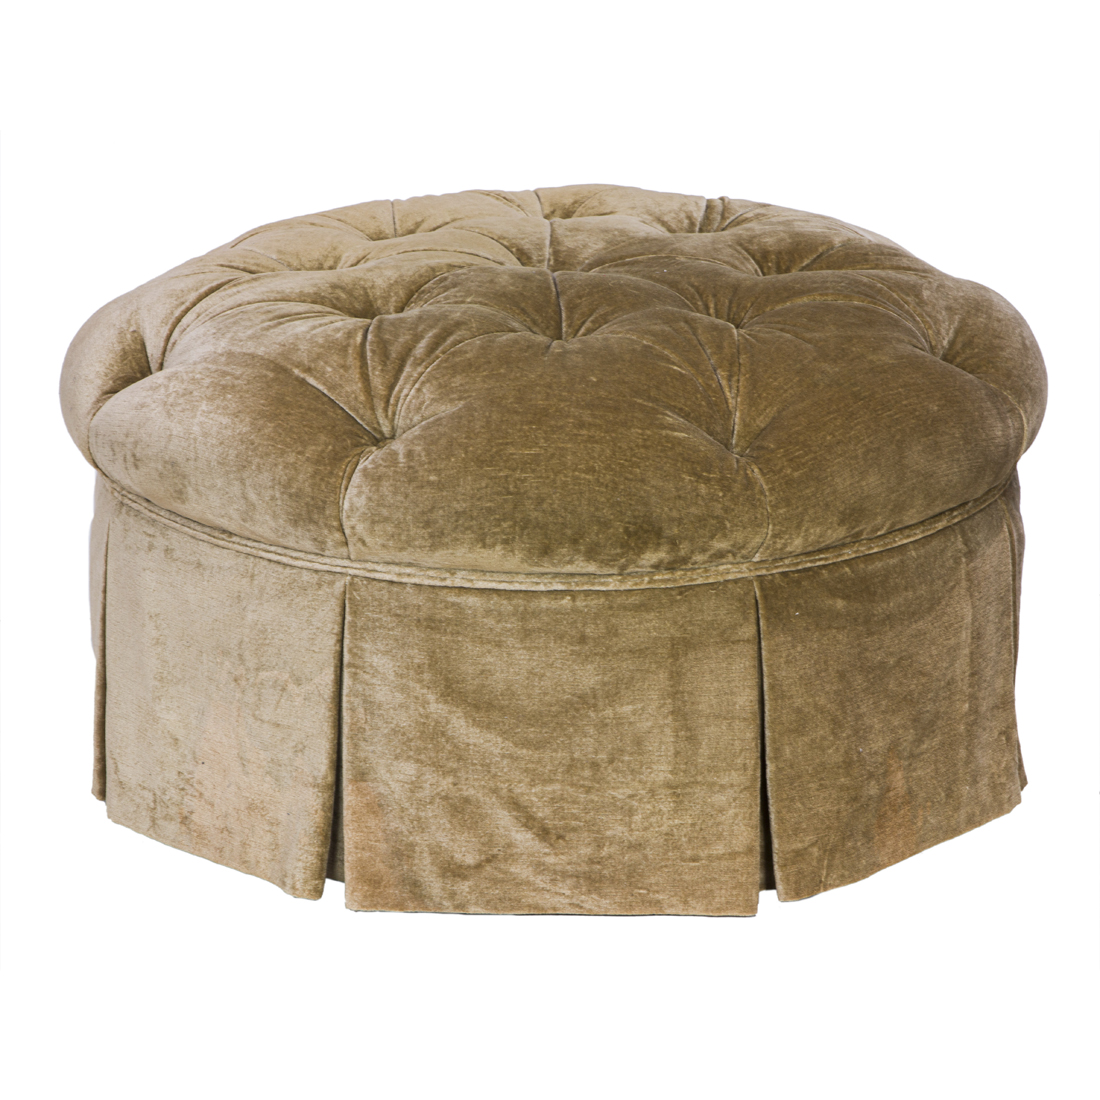 A LARGE CONTEMPORARY CUSTOM POUF